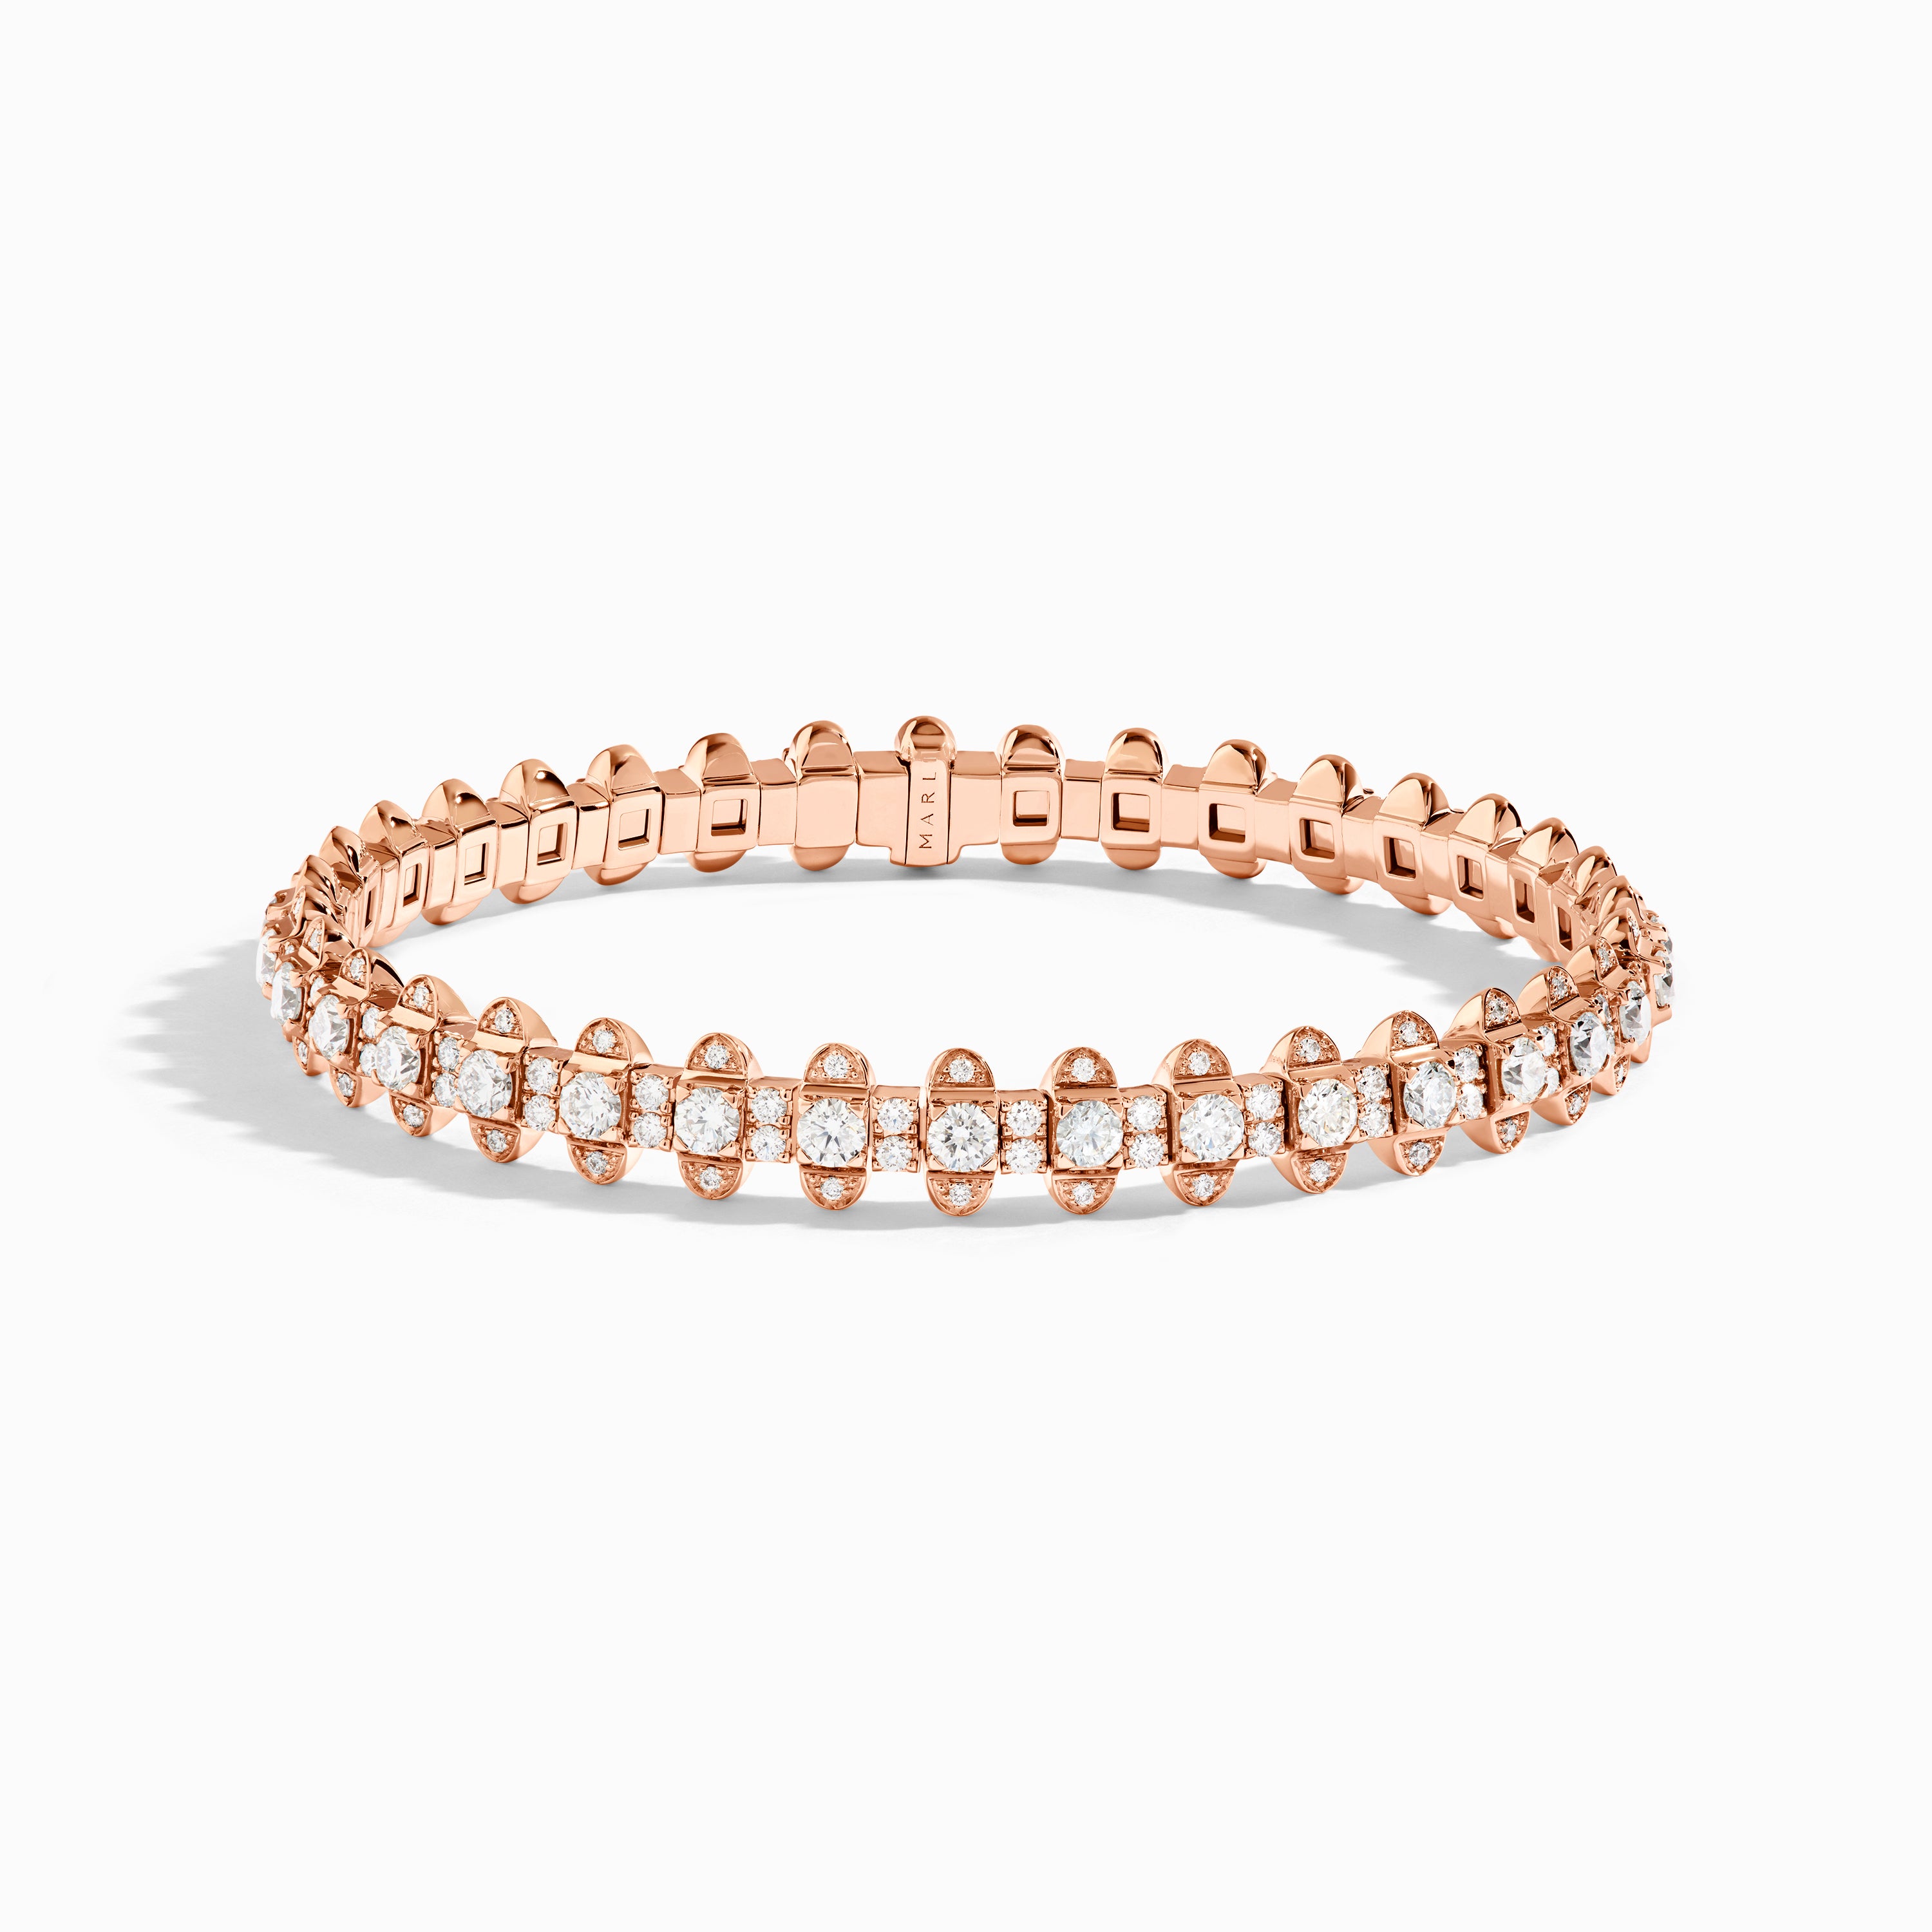 YouBella Jewellery Celebrity Inspired Gold Plated American Diamond Bracelet  for Girls and Women (Gold) (Style 1) : Amazon.in: Jewellery